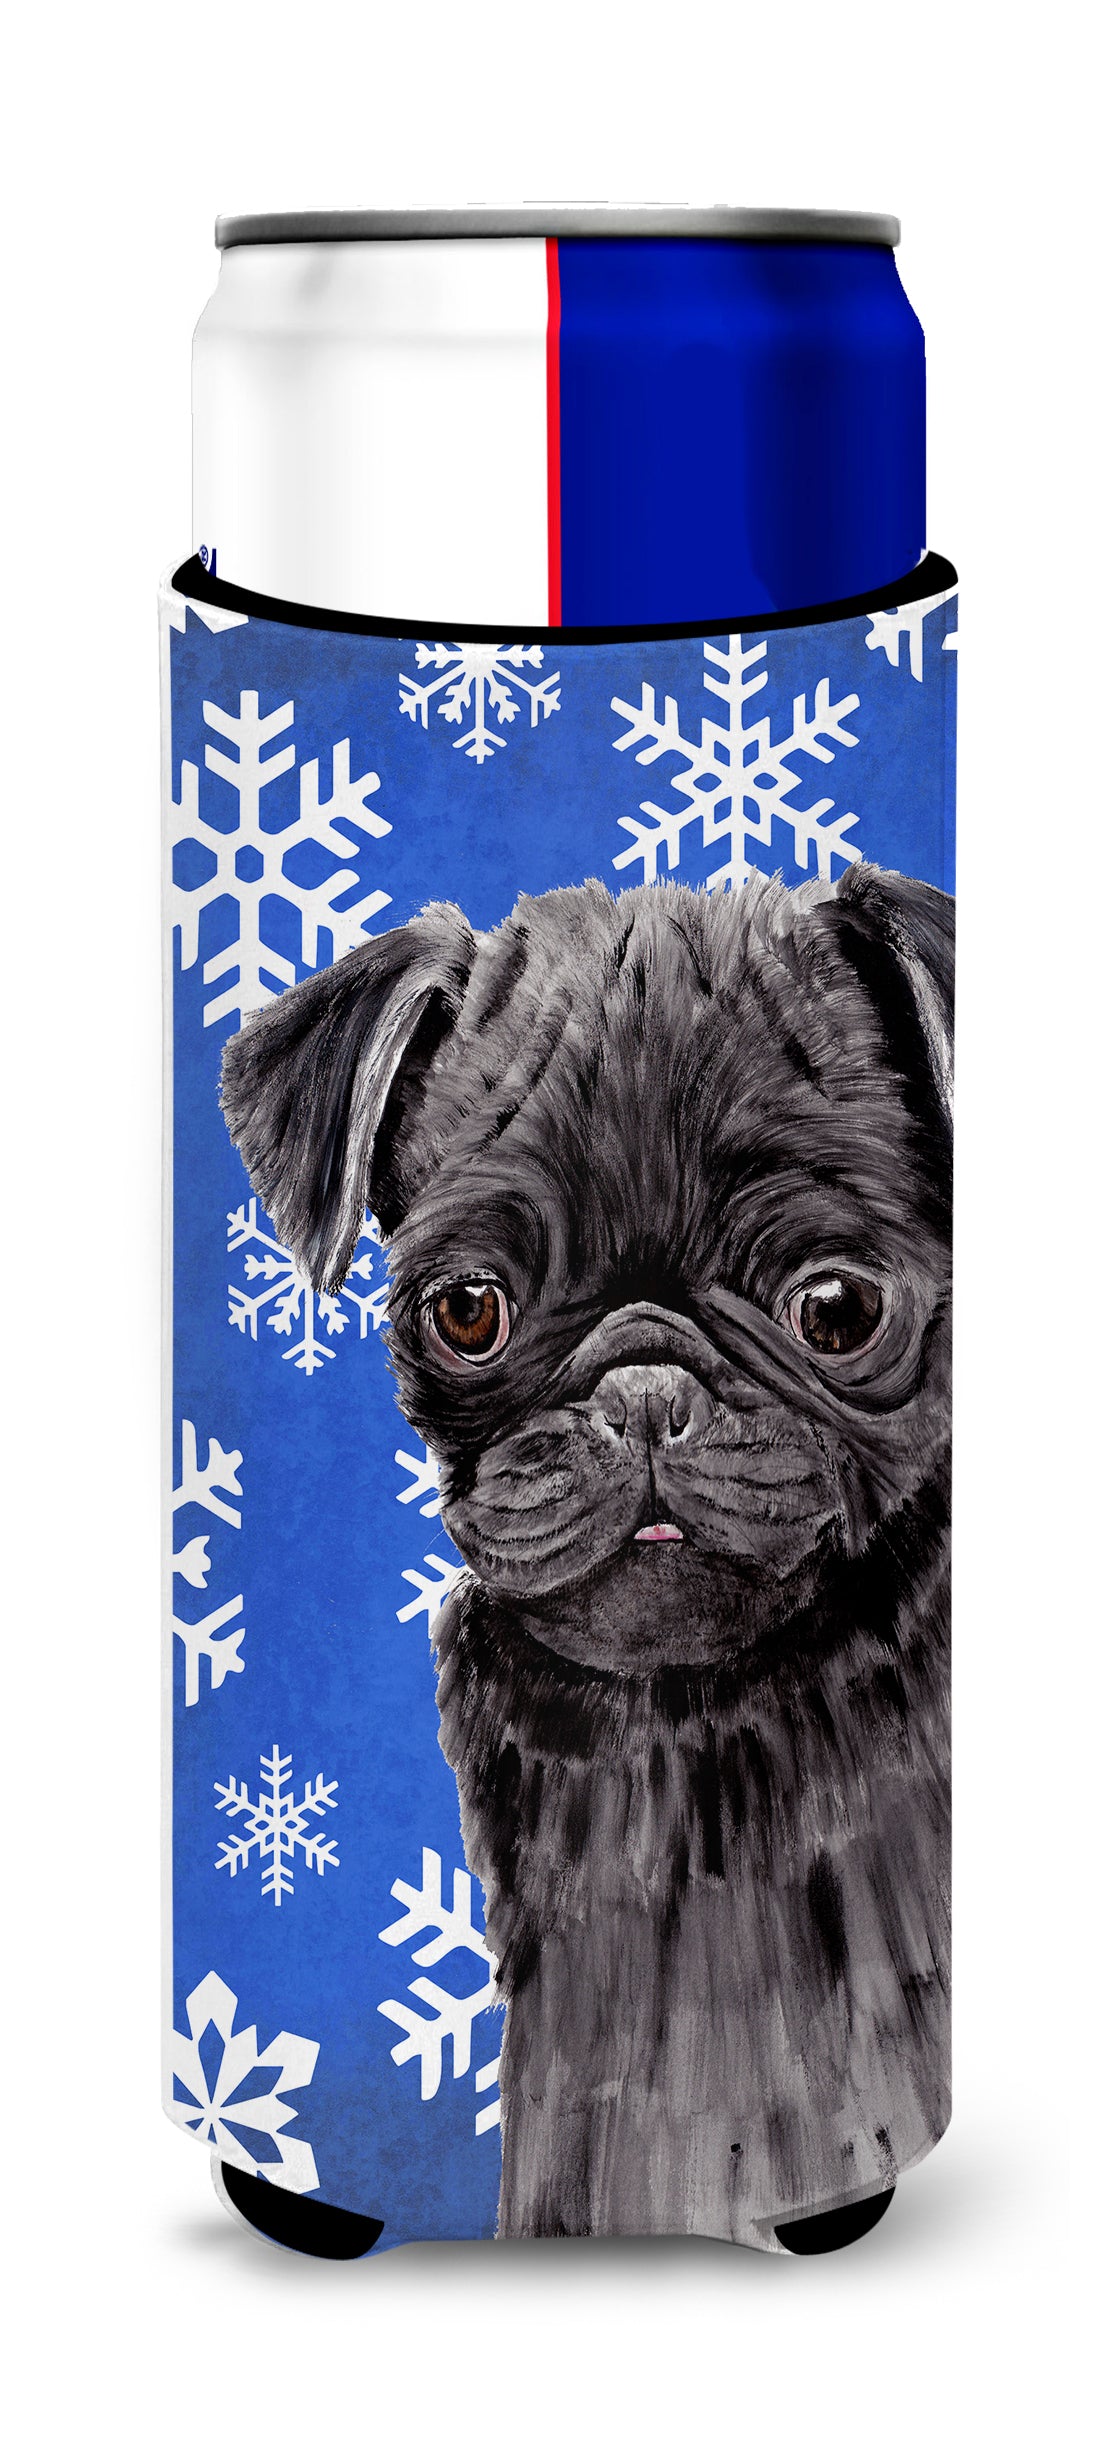 Pug Winter Snowflakes Holiday Ultra Beverage Insulators for slim cans SC9366MUK.